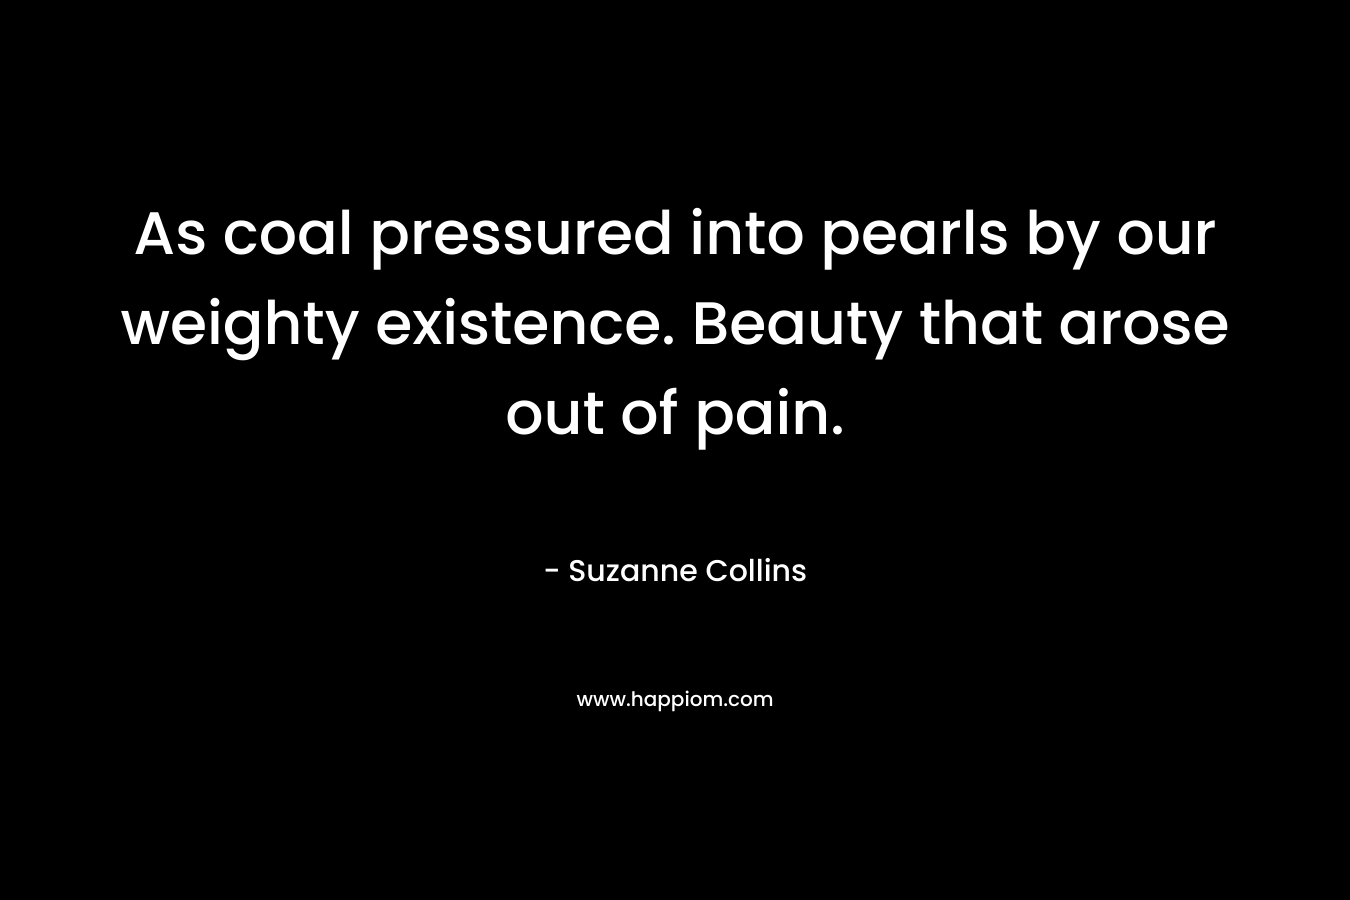 As coal pressured into pearls by our weighty existence. Beauty that arose out of pain. – Suzanne Collins